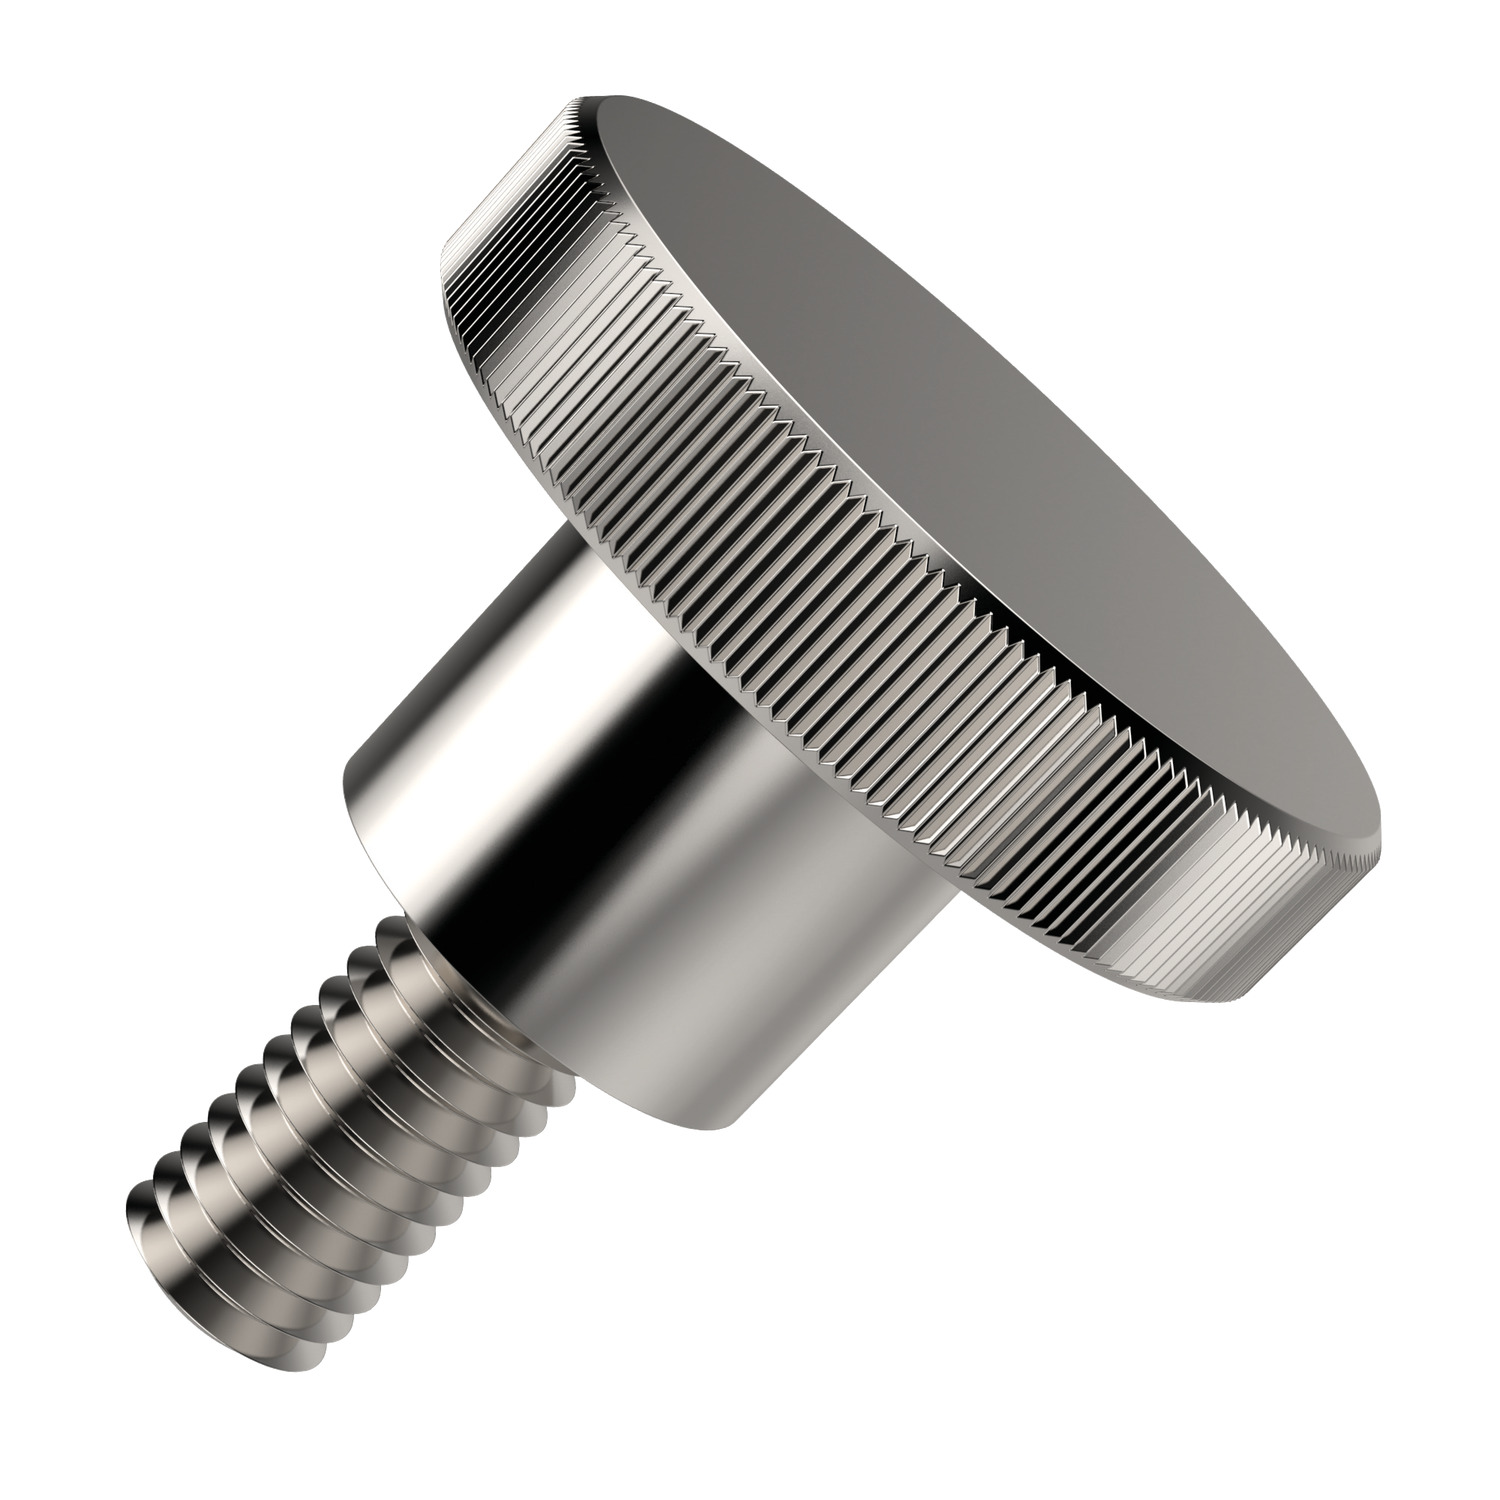 Knurled Thumb Screws This thumb screw comes with a shoulder and is manufactured to DIN 464.